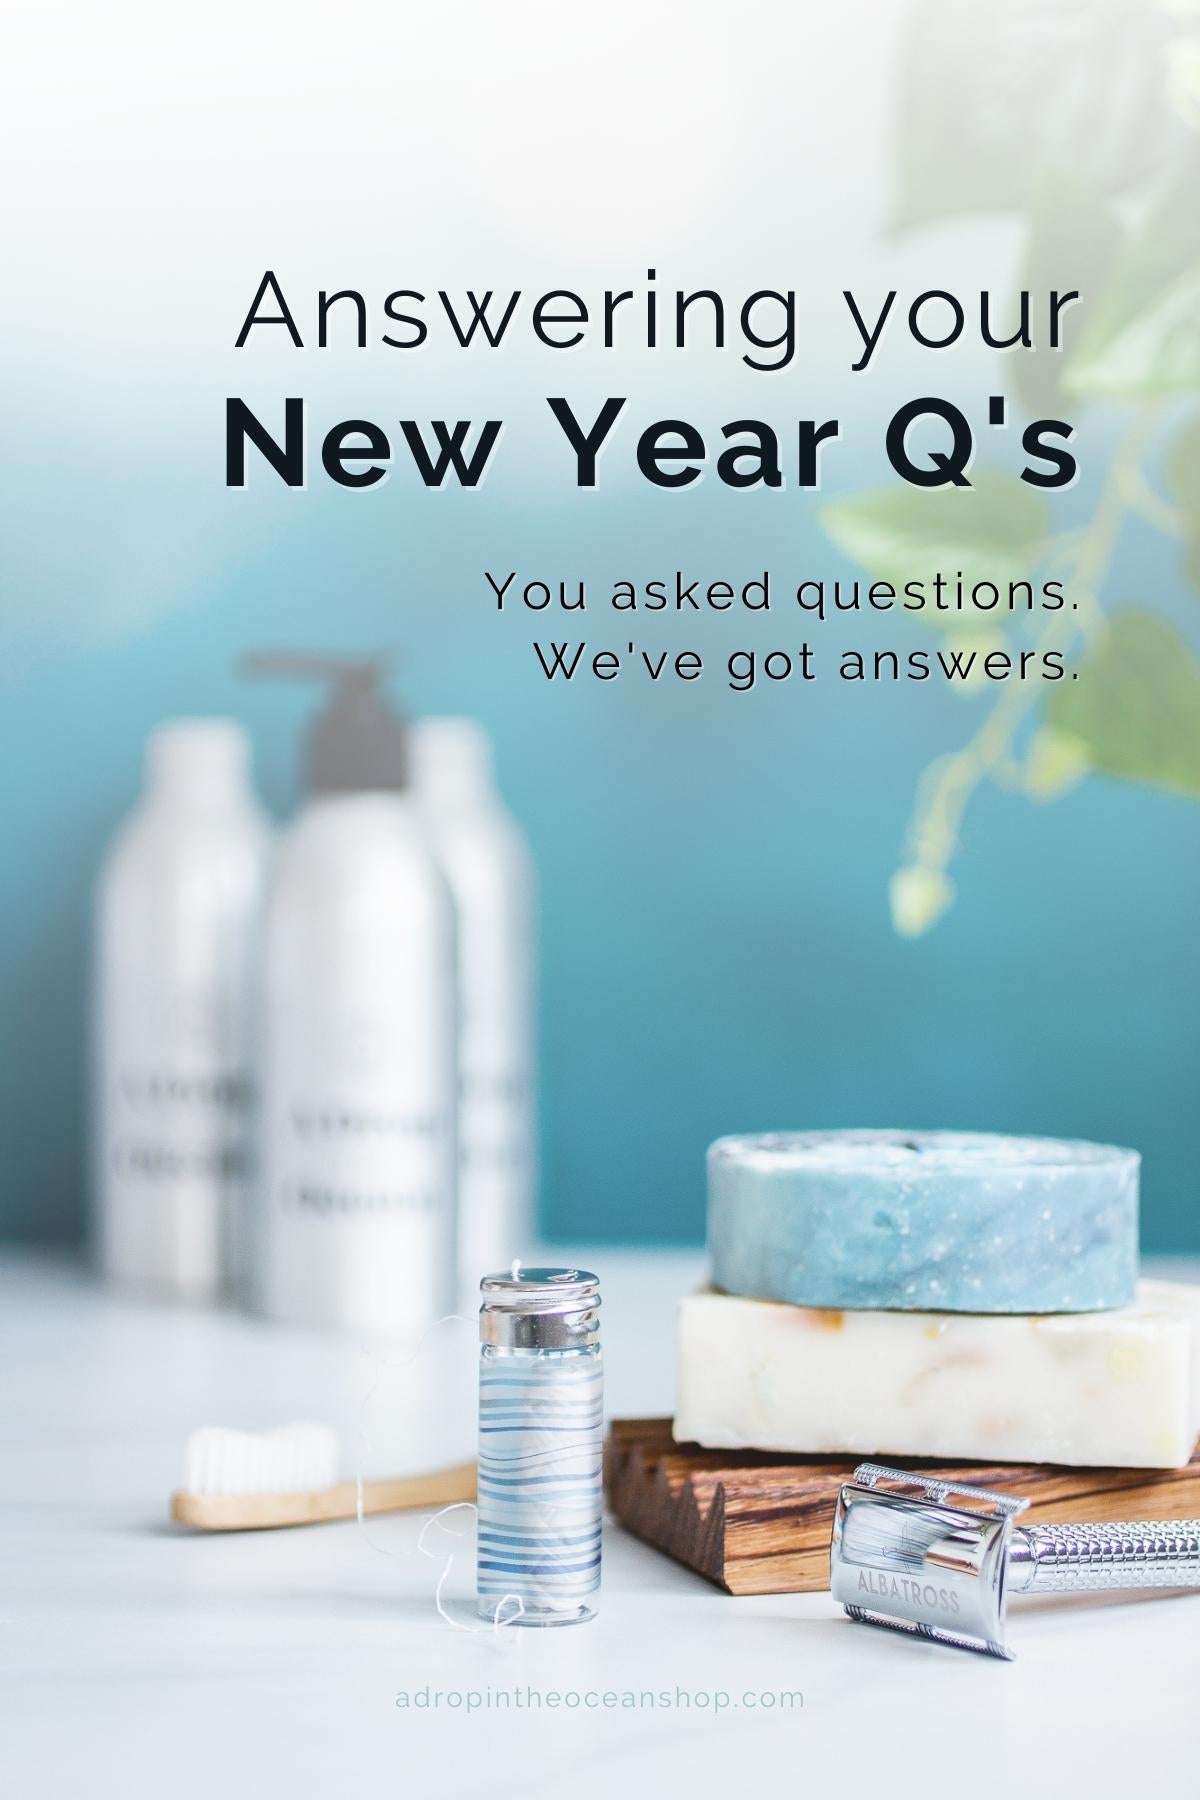 A Drop in the Ocean Zero Waste Store Answering New Year FAQs